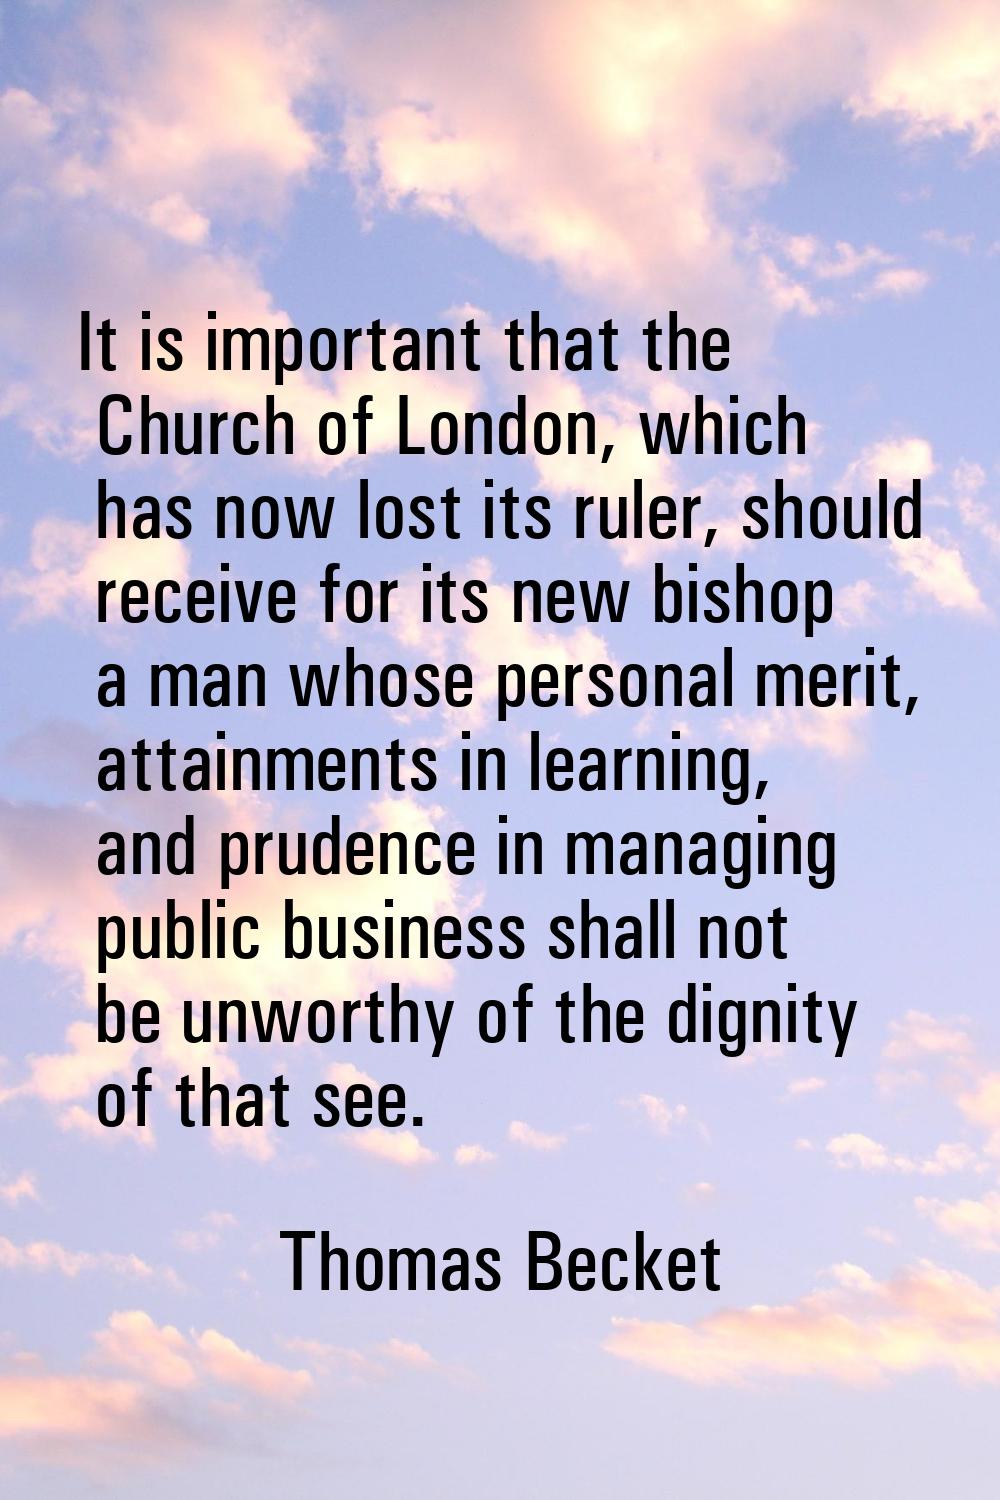 It is important that the Church of London, which has now lost its ruler, should receive for its new